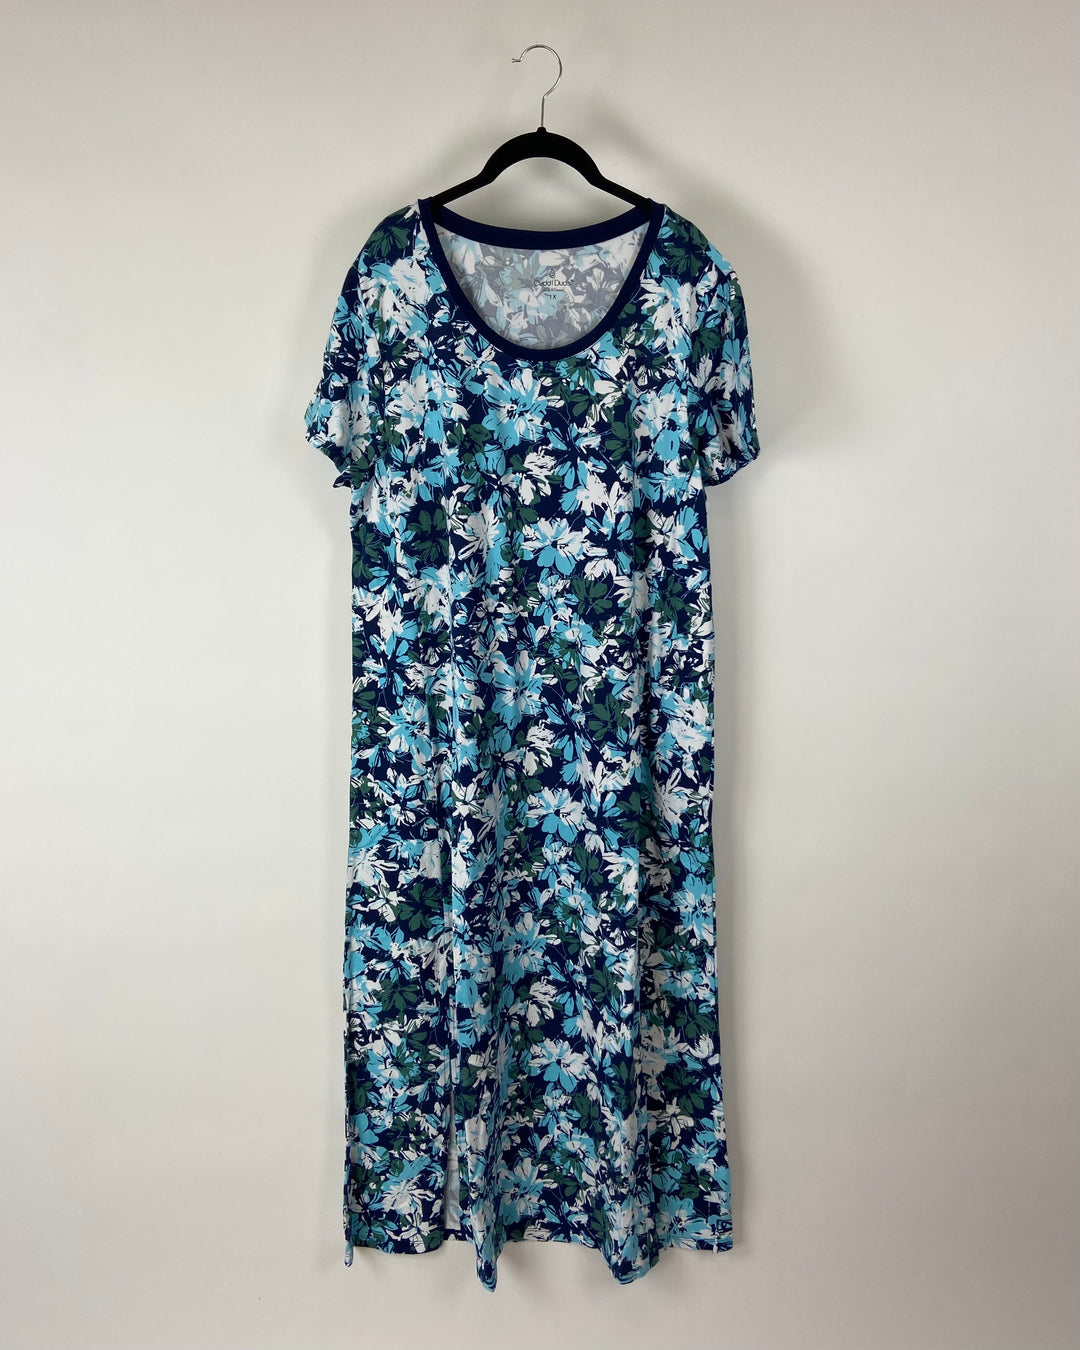 Blue and Green Floral Maxi Dress - Size 2/4, 6/8/ and 18/20